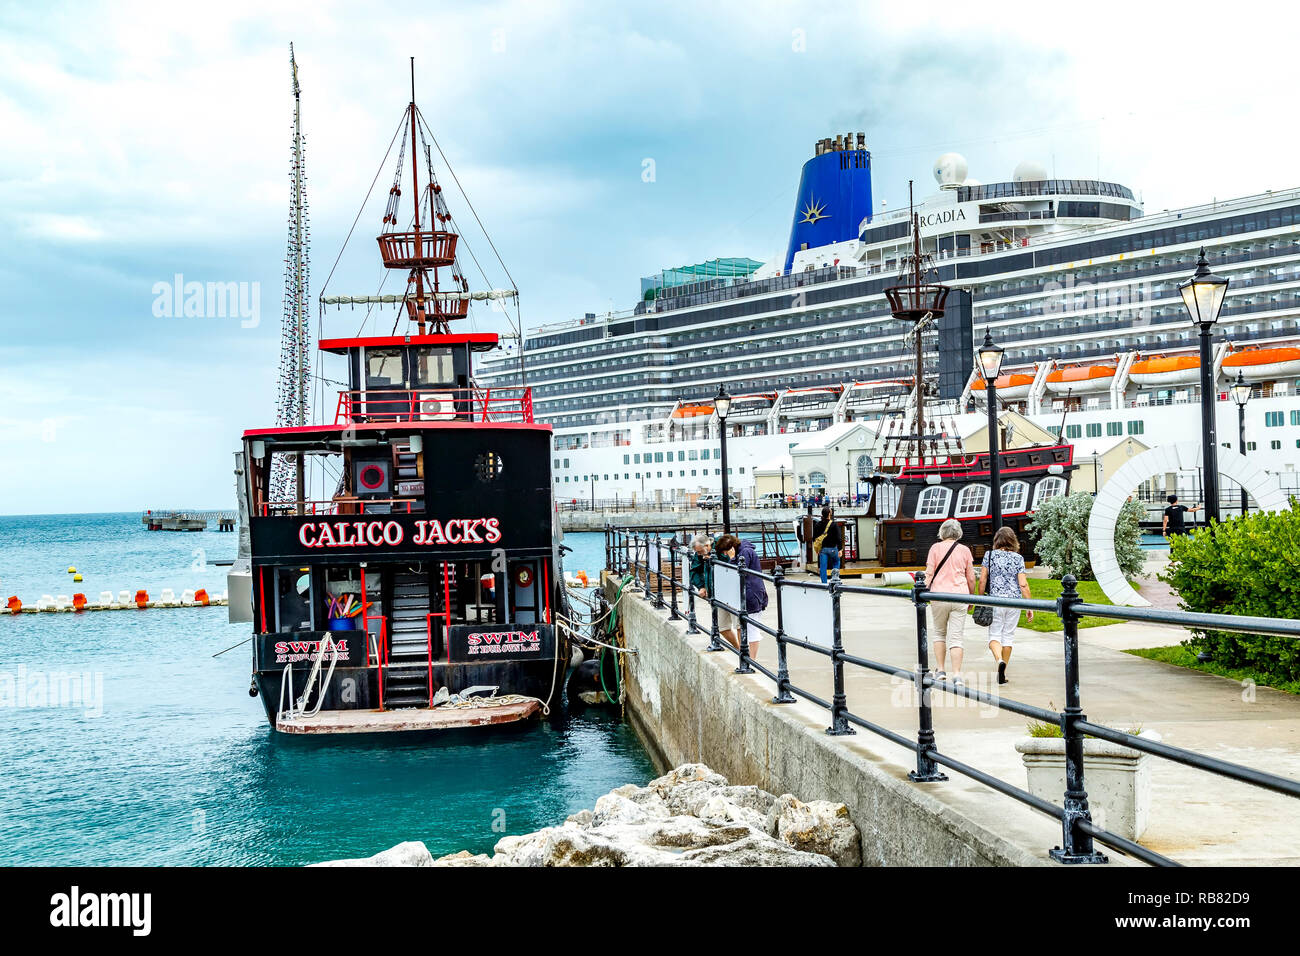 Calico Jack's floating bar moored up in Hamilton, Burmuda with P&O Arcadia in the background. Stock Photo